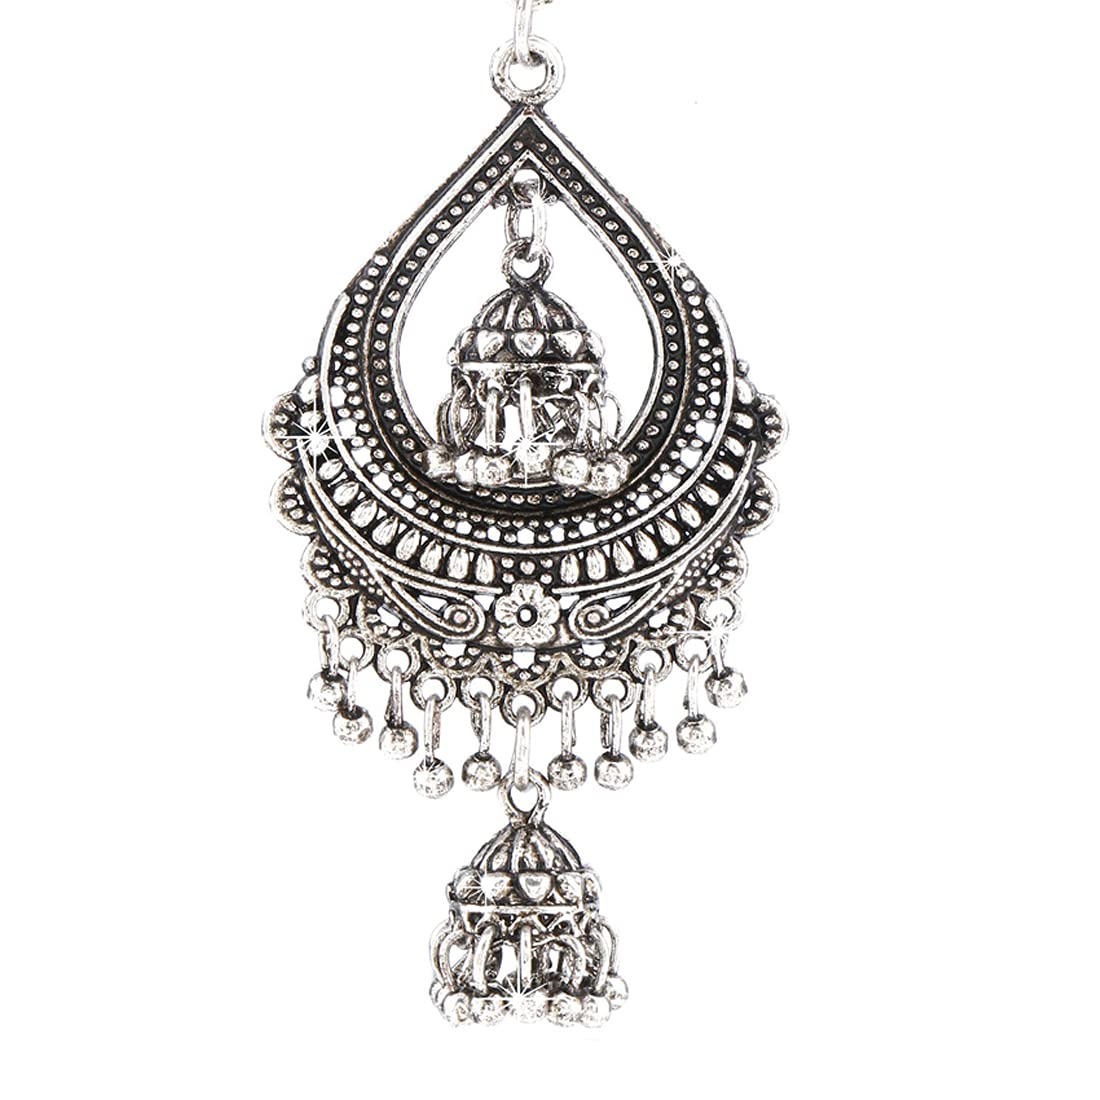 Yellow Chimes Oxidised Jhumka Earrings for Women Crafted Silver Oxidised Traditional Jhumka Chandbali Earrings for Women and Girls